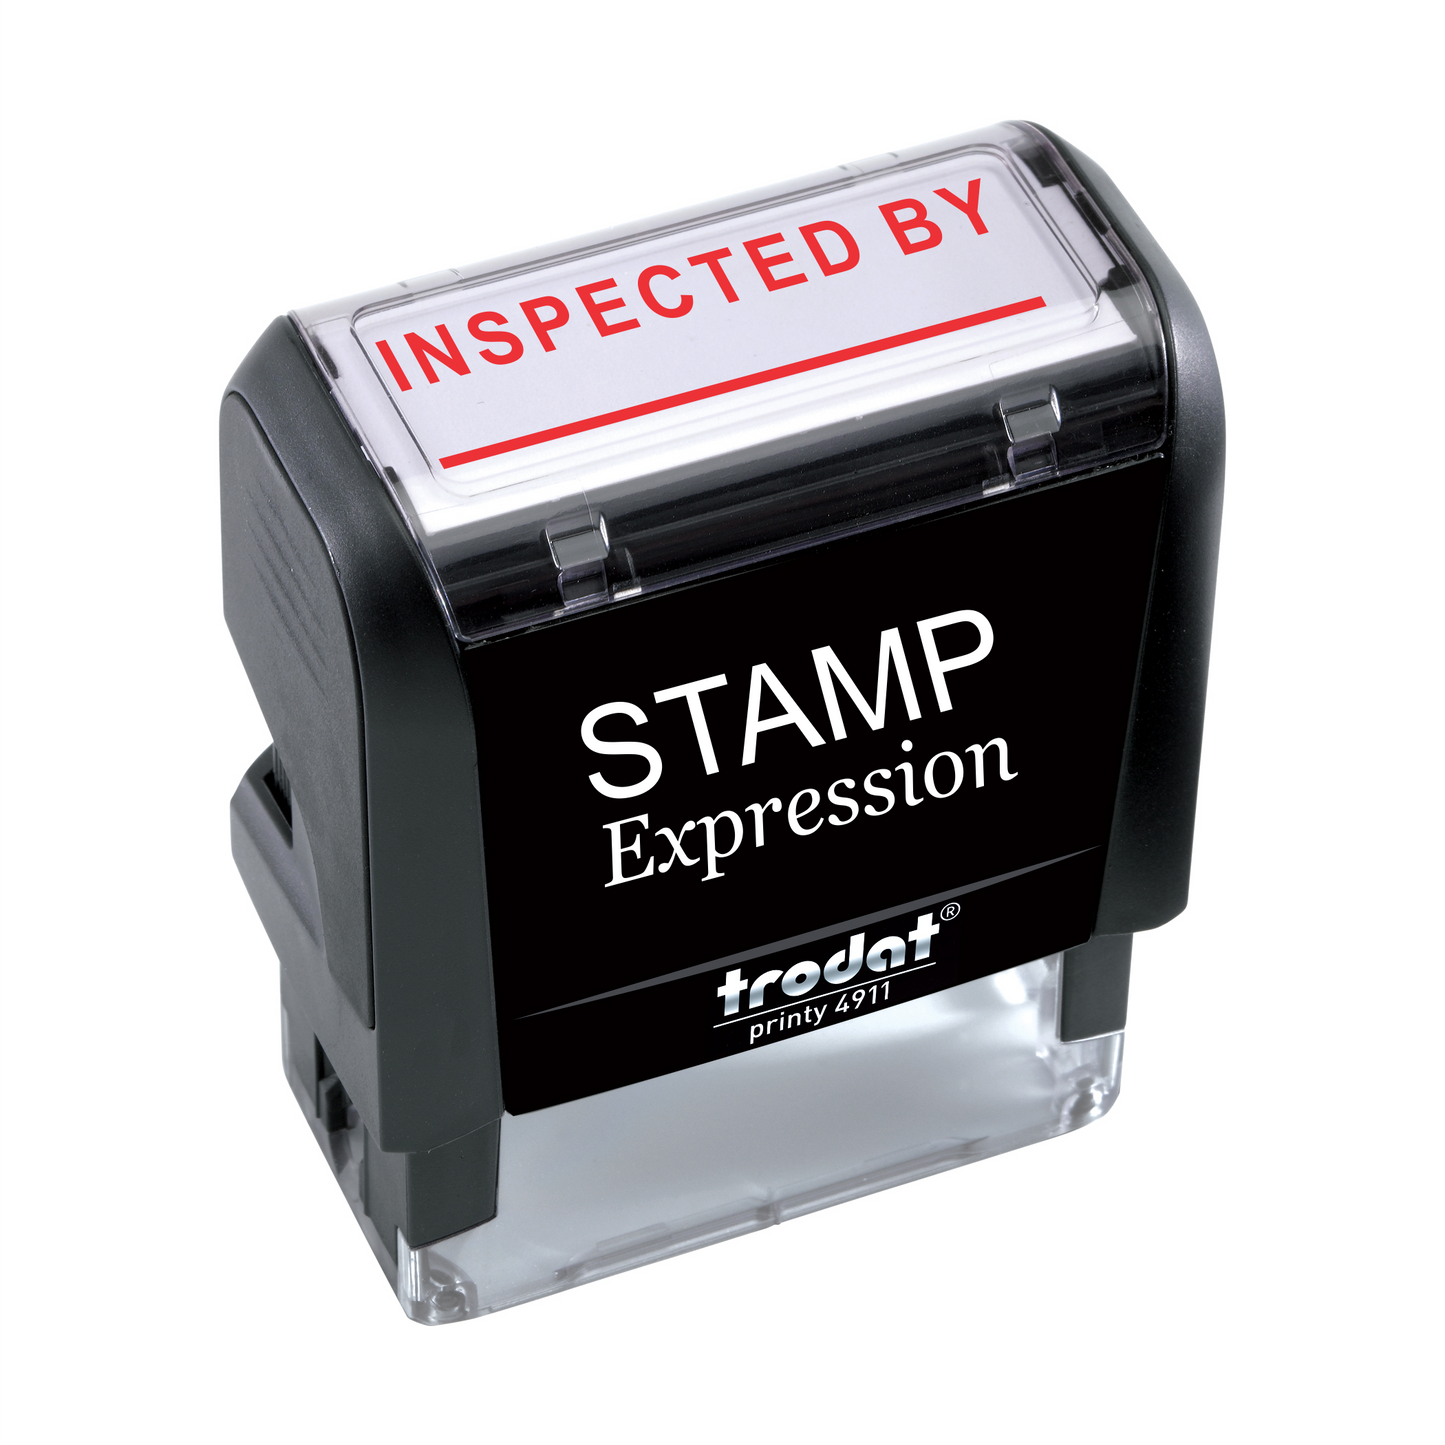 Inspected by with Line Office Self Inking Rubber Stamp (SH-5921)